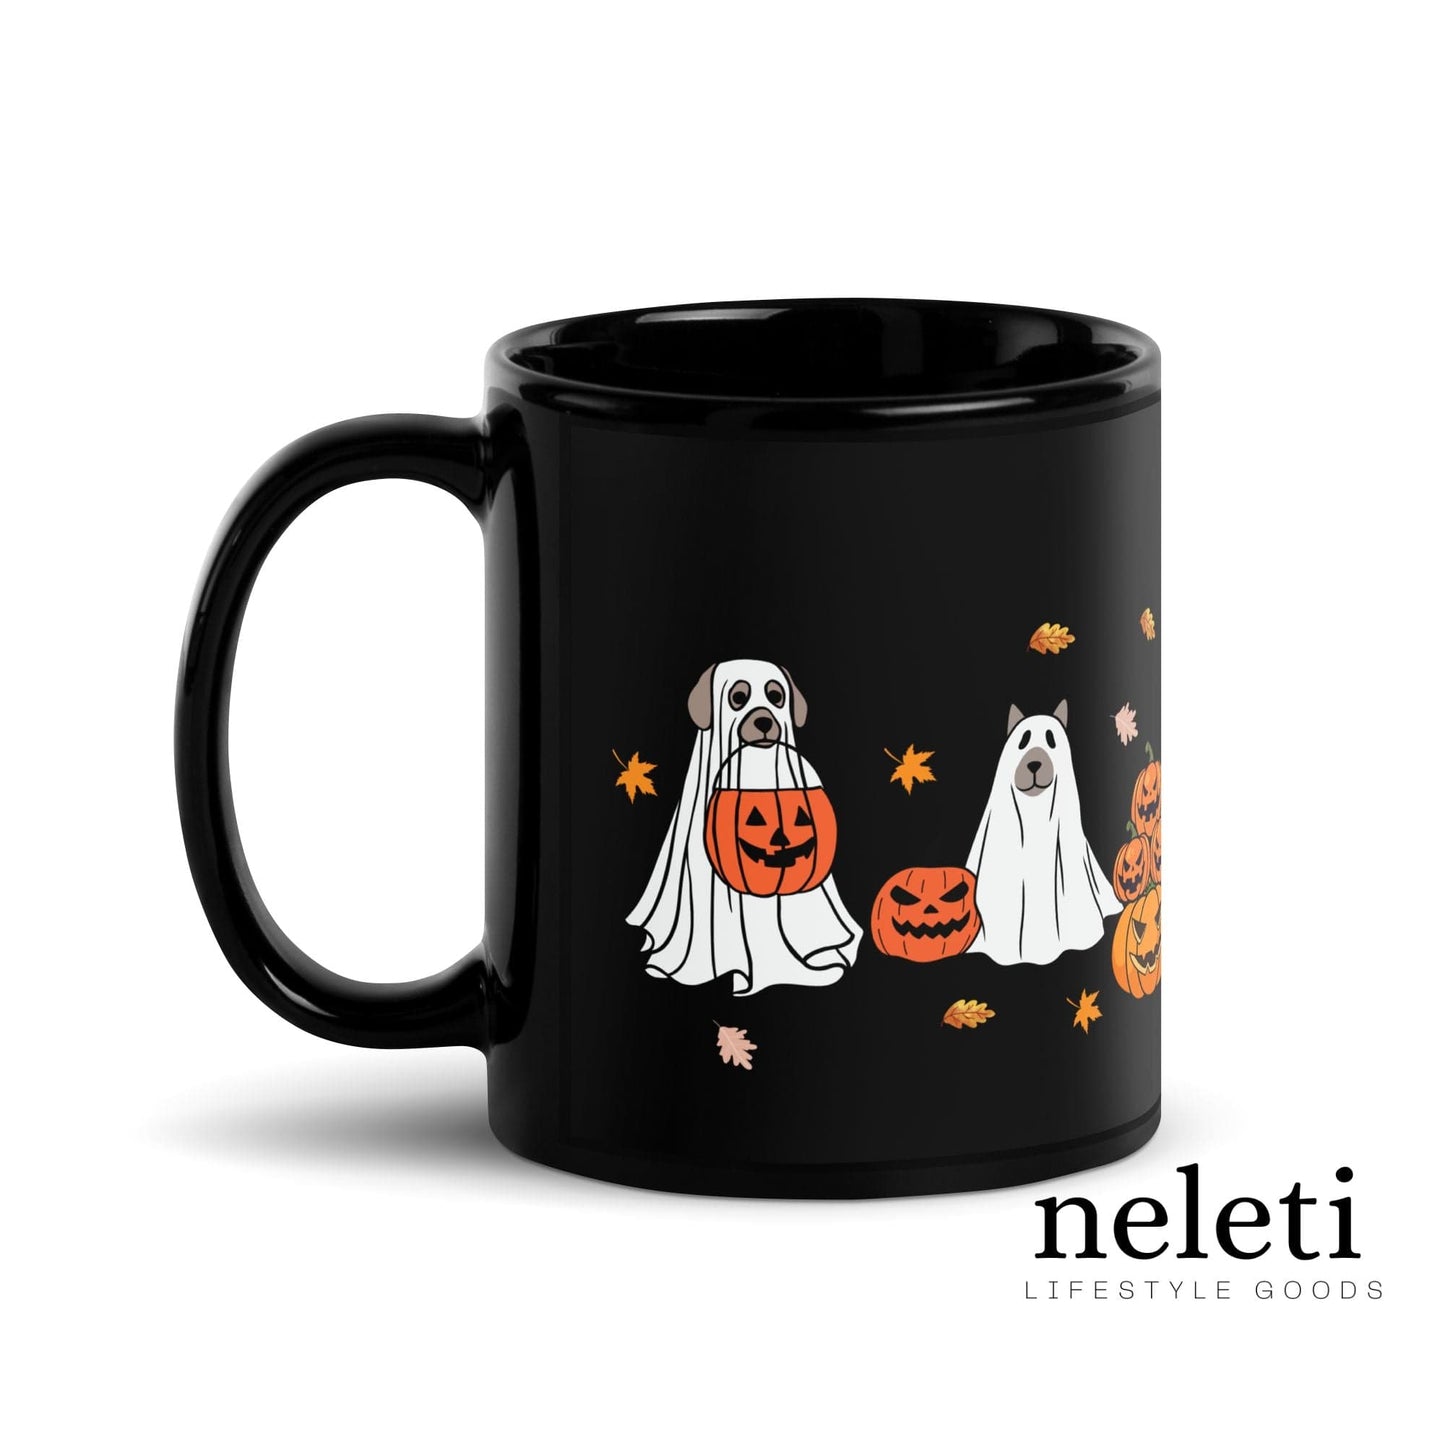 Halloween-themed black mug designed for dog lovers with spooky motifs